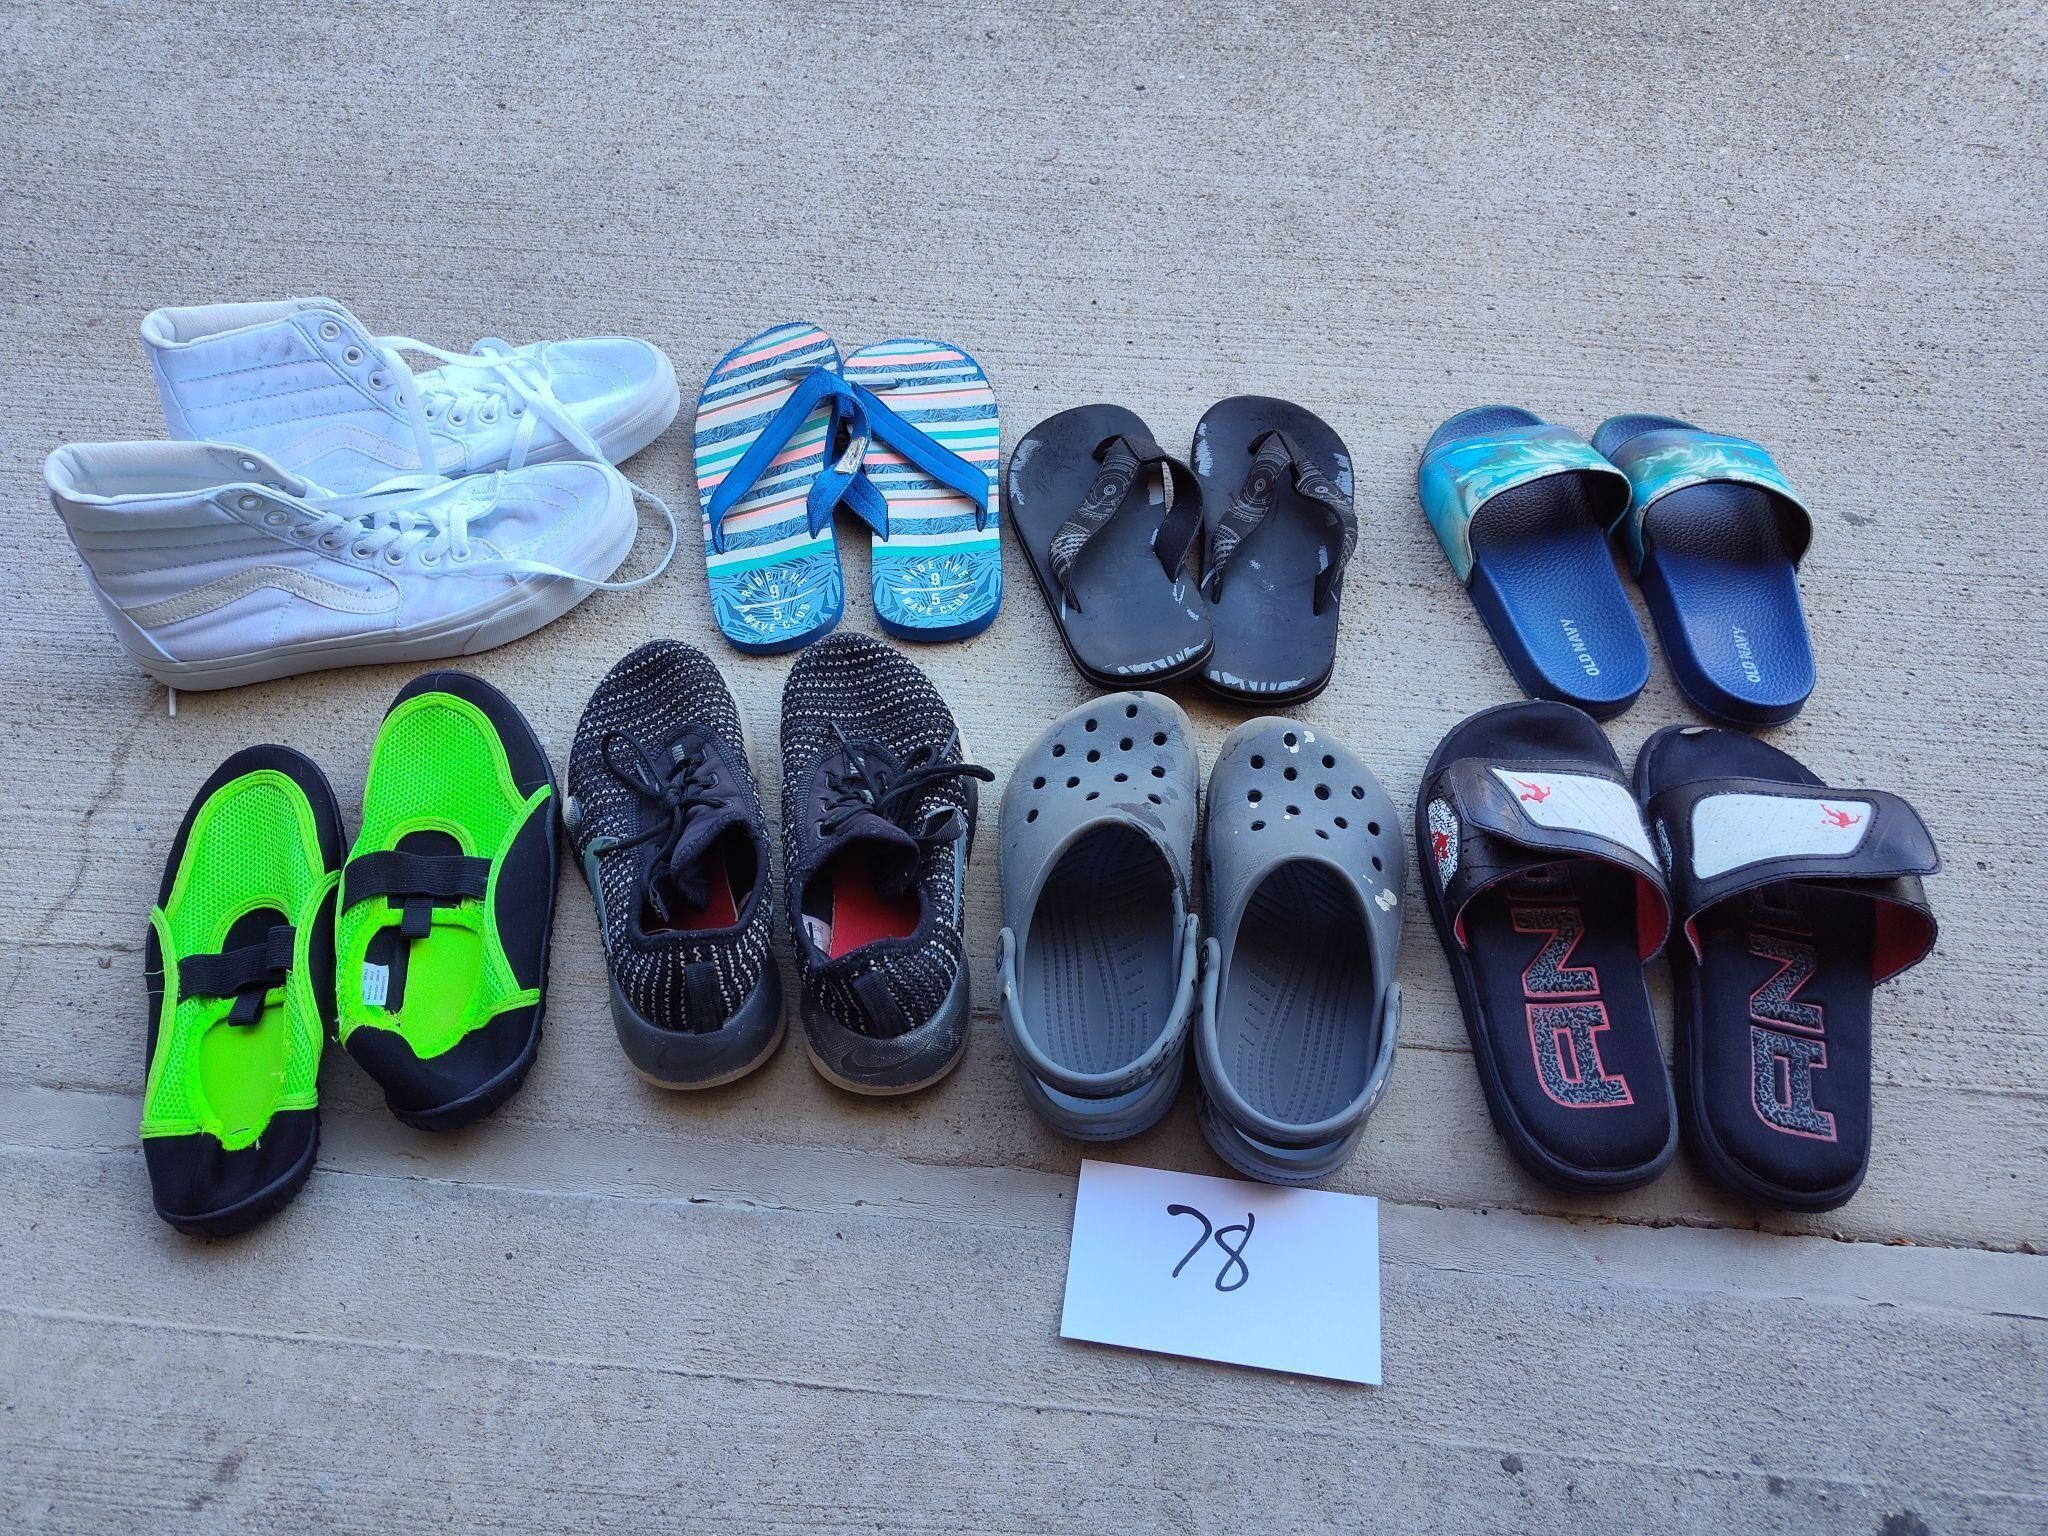 Lot of Kids Shoes, Sandals, Water Socks